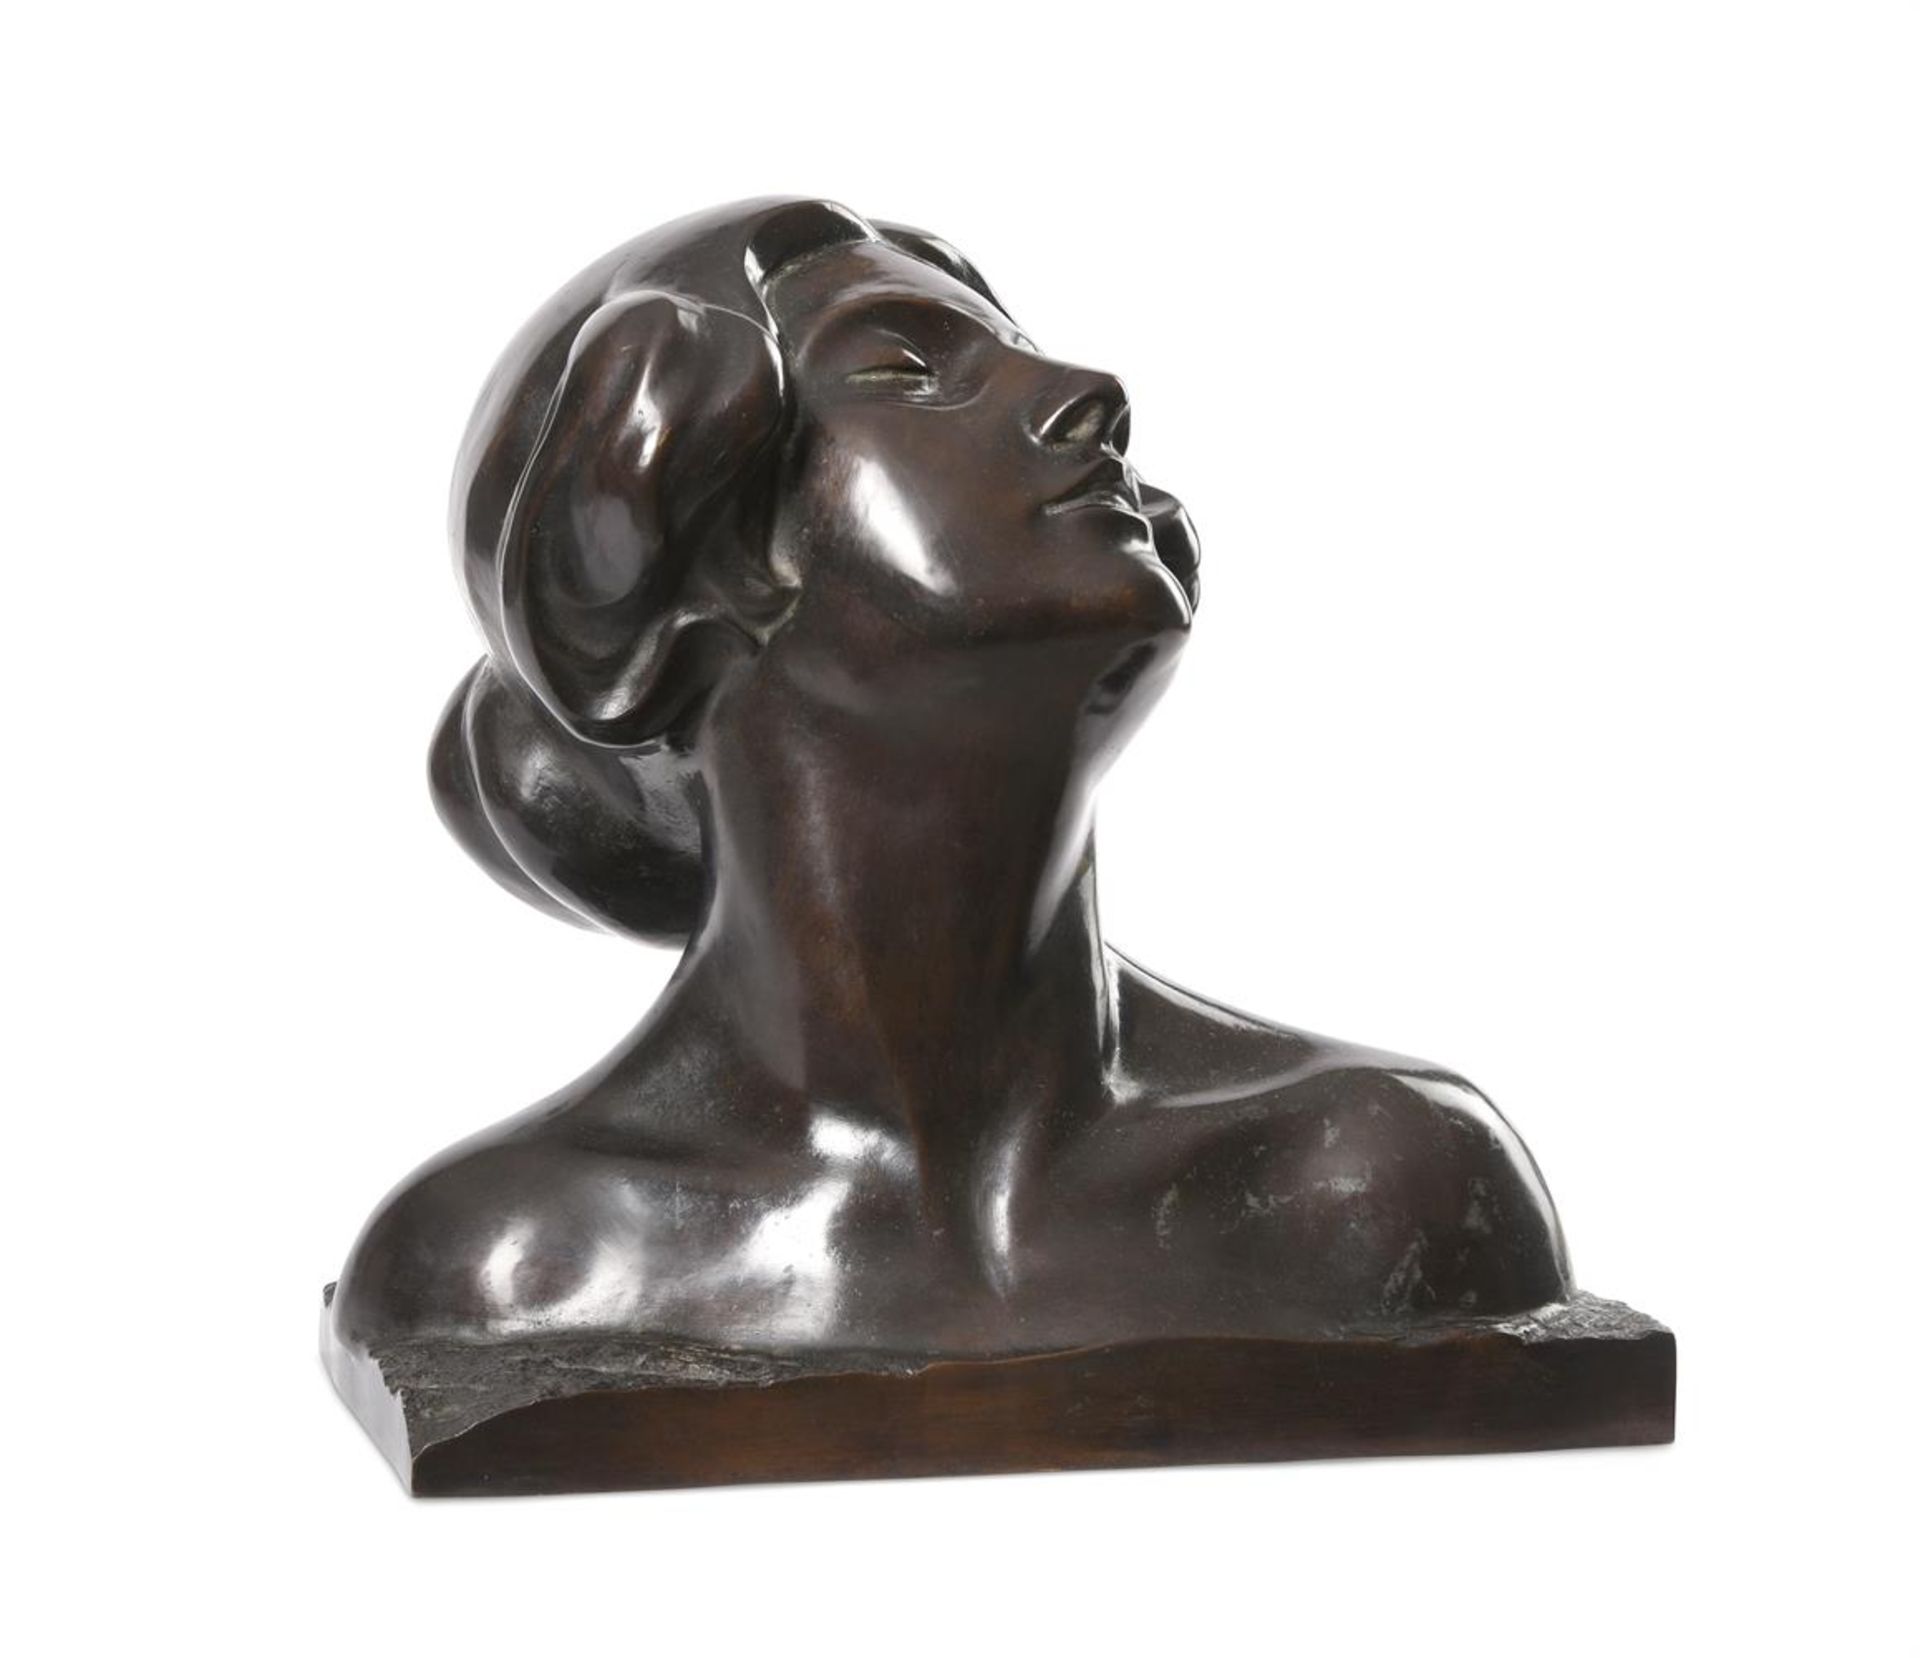 AFTER JEAN-LÉON GÉRÔME (FRENCH 1824-1904) A BRONZE BUST OF A WOMAN, LATE 19TH OR EARLY 20TH CENTURY - Image 2 of 3